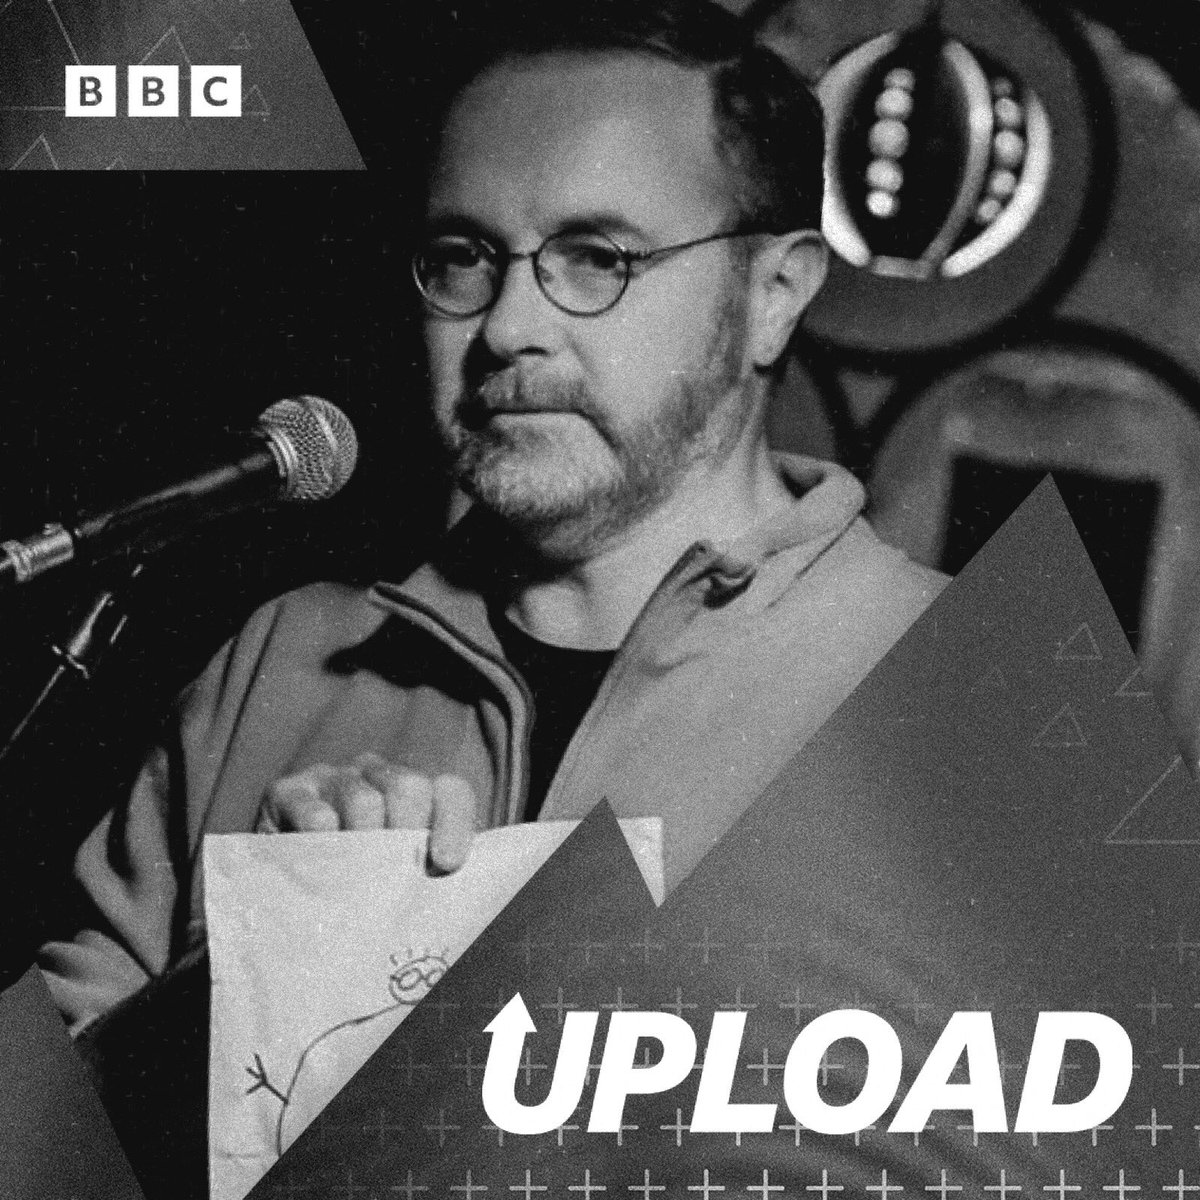 More delighted than this picture suggests to be a part of the @BBCUpload showcase at @LyraFest tomorrow night with an open mic hosted by @BristolTonic 😁😁😁

With thanks to @adam_crowther @ChrisArnoldInc and the team

Come along to @actatheatre for 7pm 🙏❤️